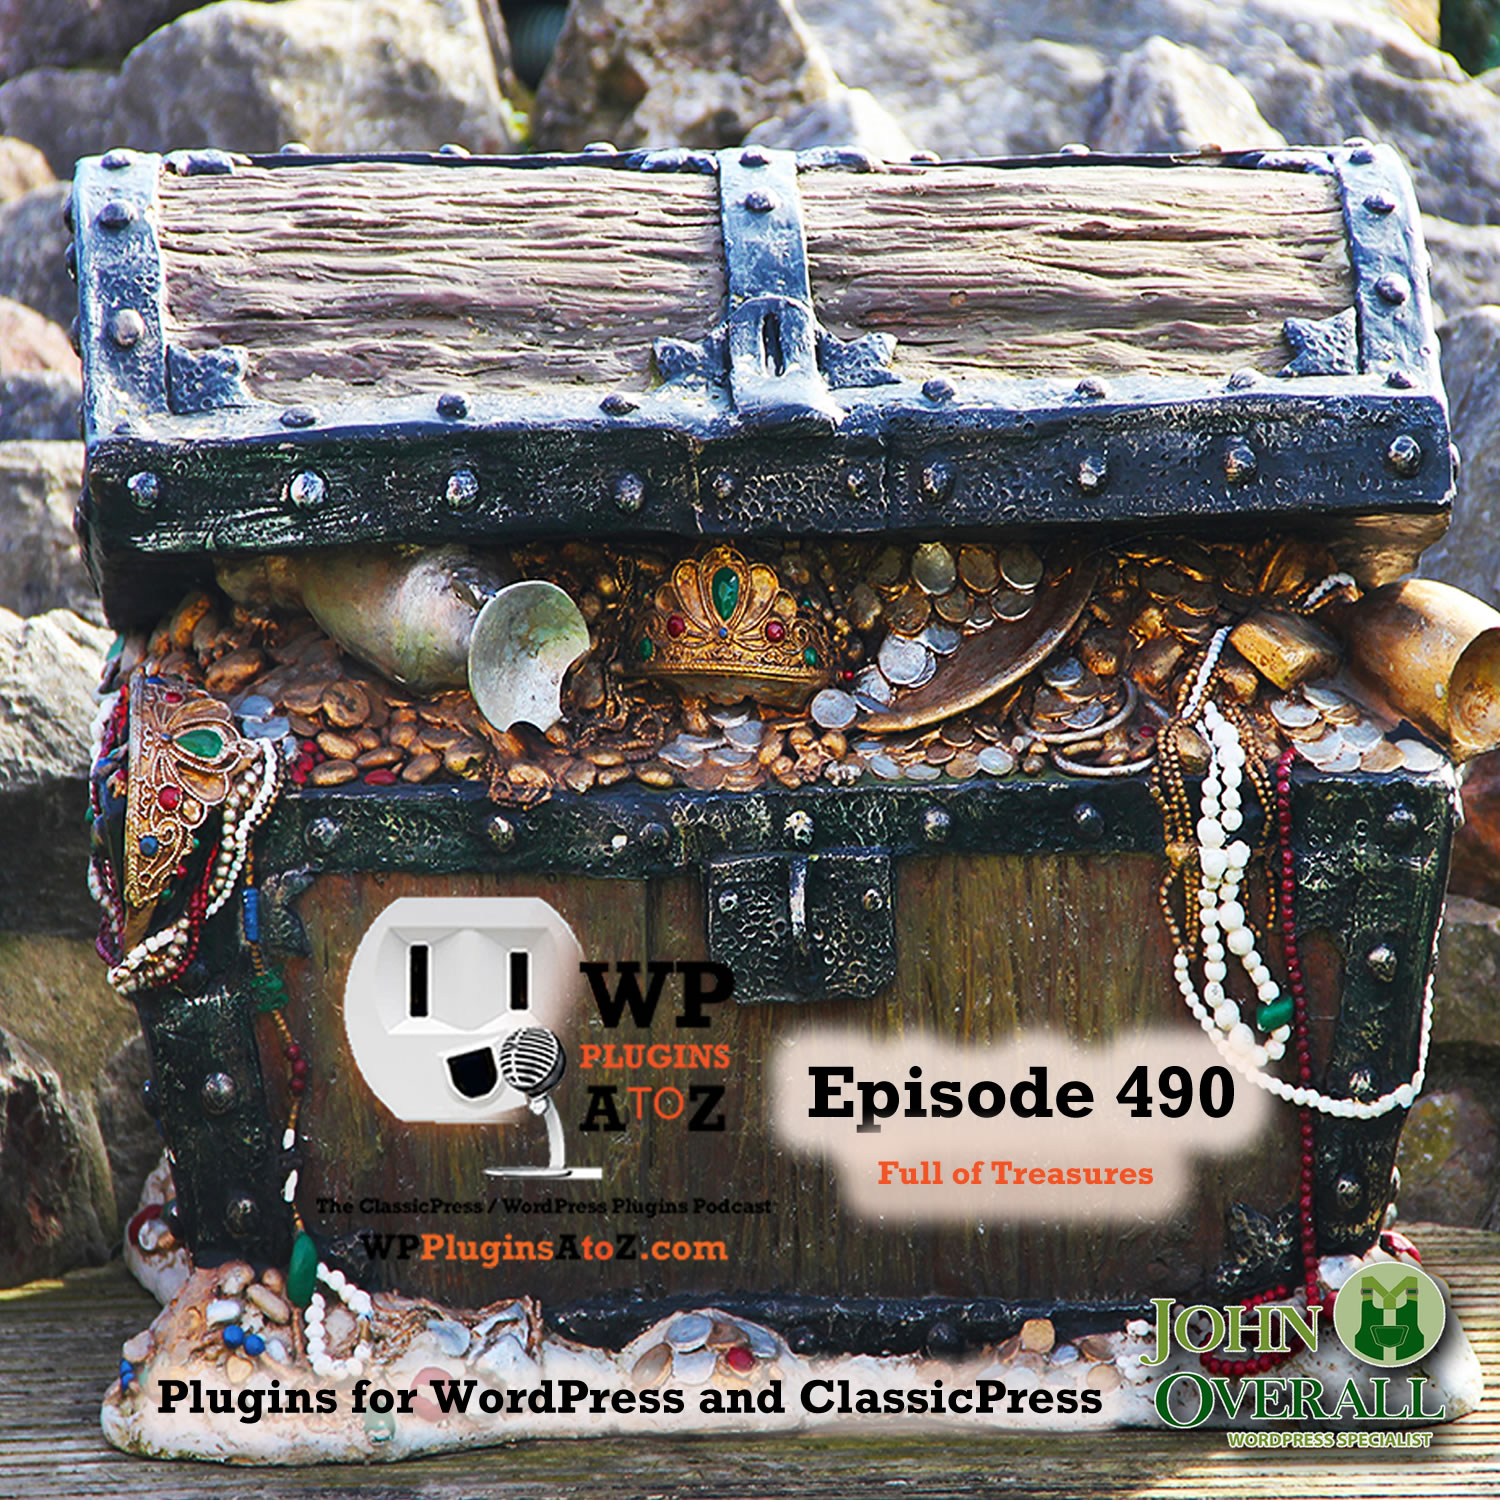 Full of Treasures It's Episode 490 with plugins for Cooking, Image Display, History, Debugging, Protection, BBQ Fire, and ClassicPress Options. It's all coming up on WordPress Plugins A-Z! Simple History, Best Image Gallery & Responsive Photo Gallery – FooGallery, WP Recipe Maker, BBQ Firewall, Debug Bar, Disable User Enumeration and ClassicPress options on Episode 490.